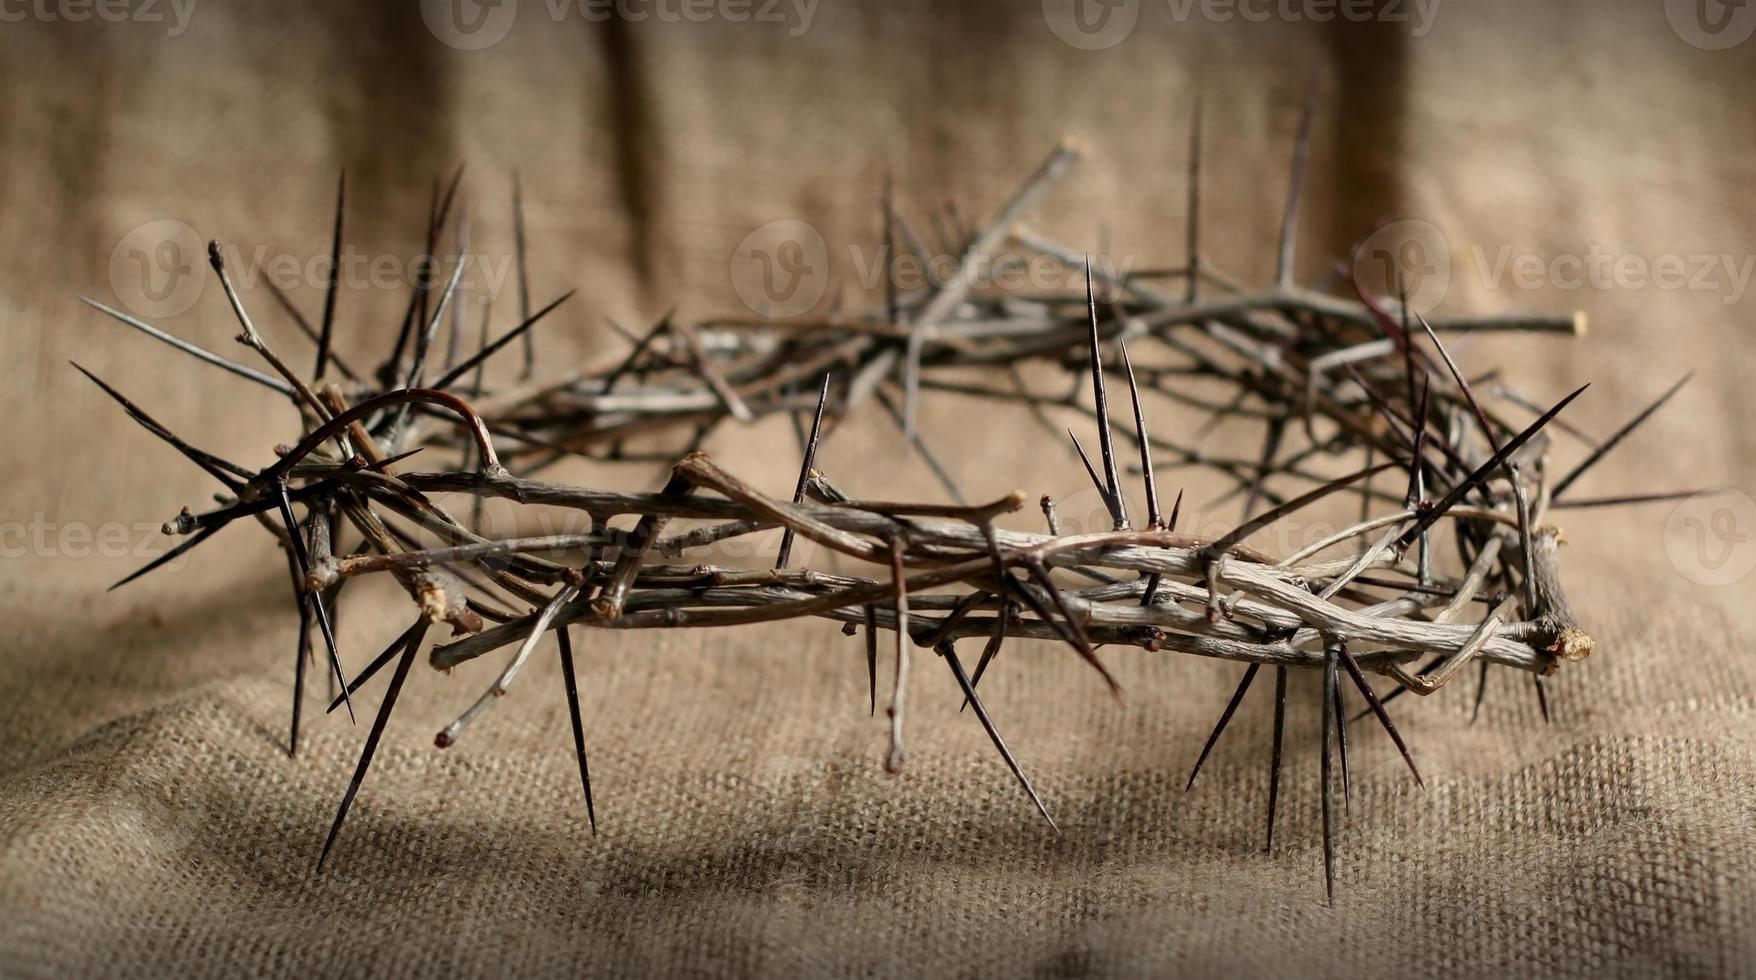 crown of thorns photo